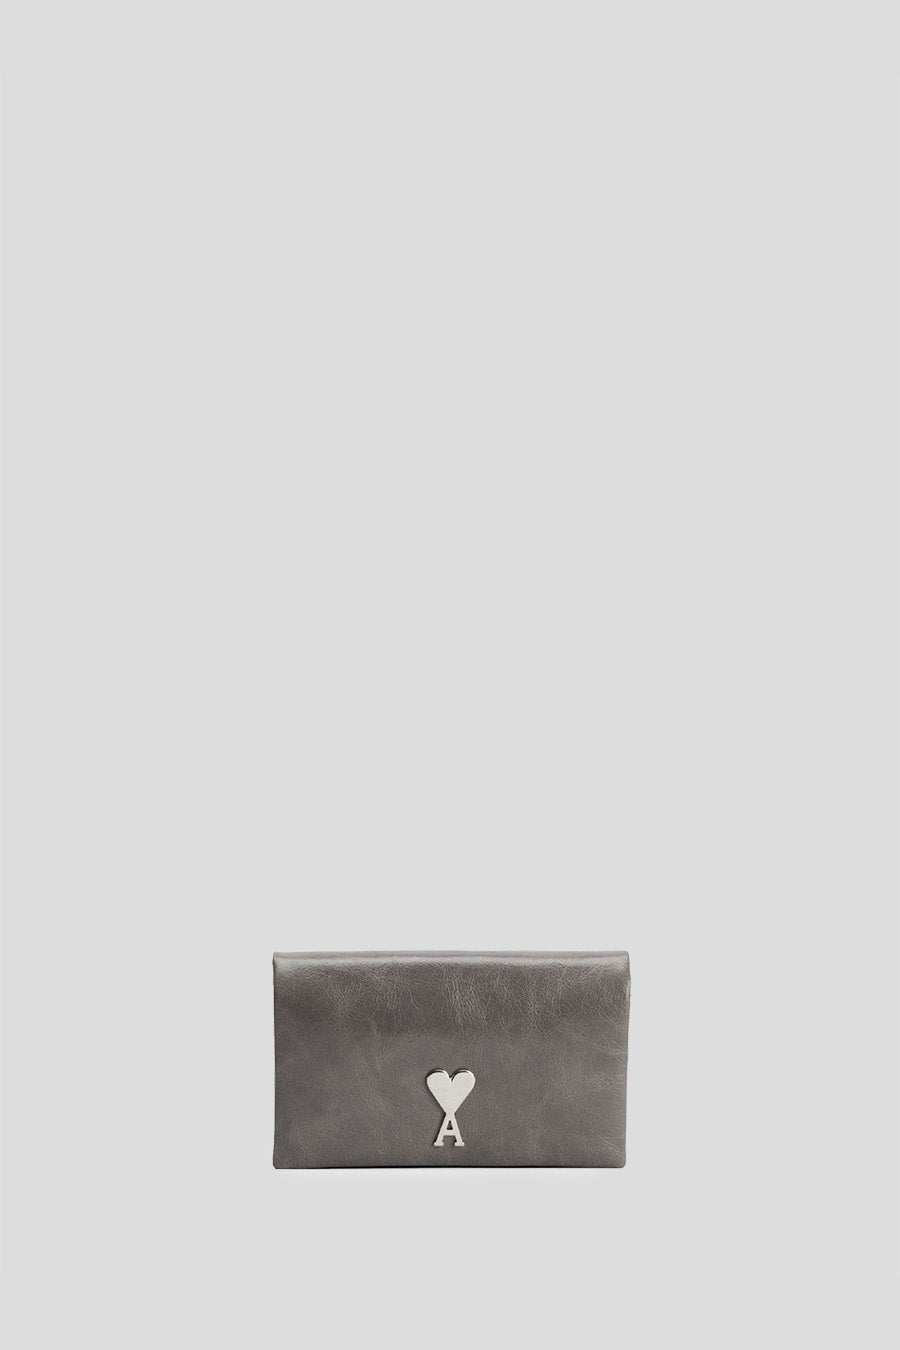 AMI PARIS - CHAIN WALLET DO YOU WANT MINERAL GREY - LE LABO STORE